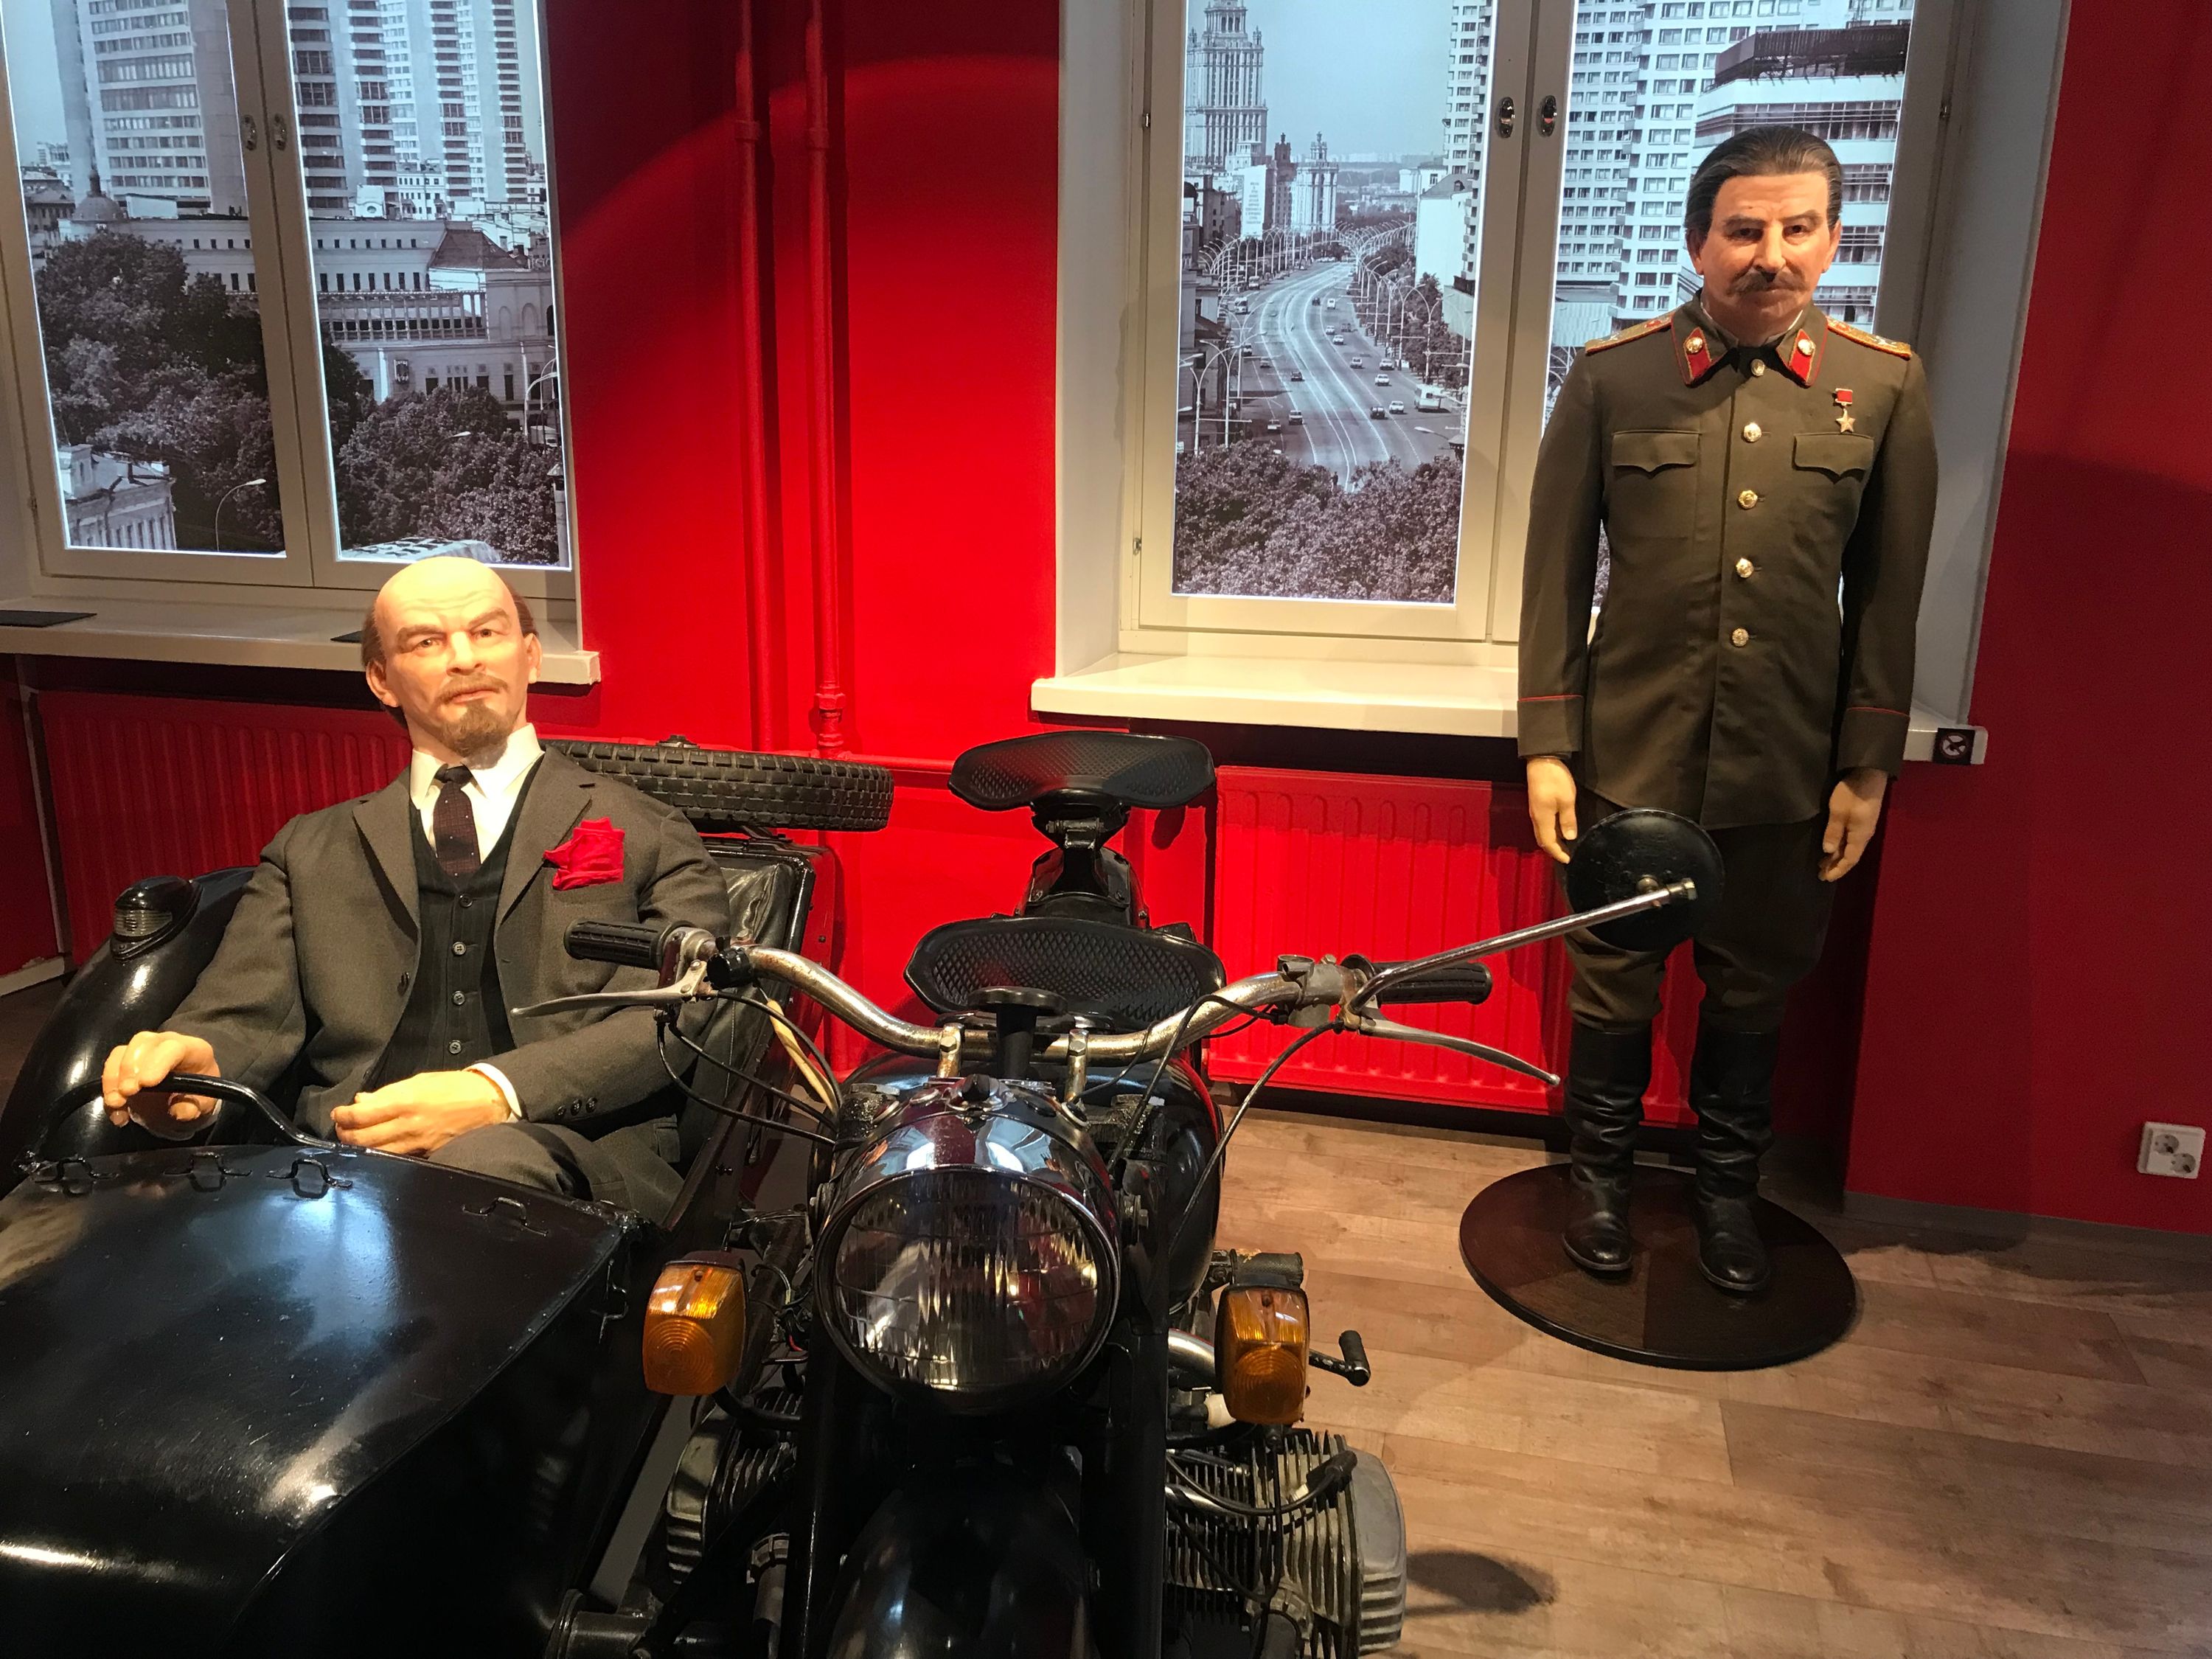 Lenin and Stalin in a museum